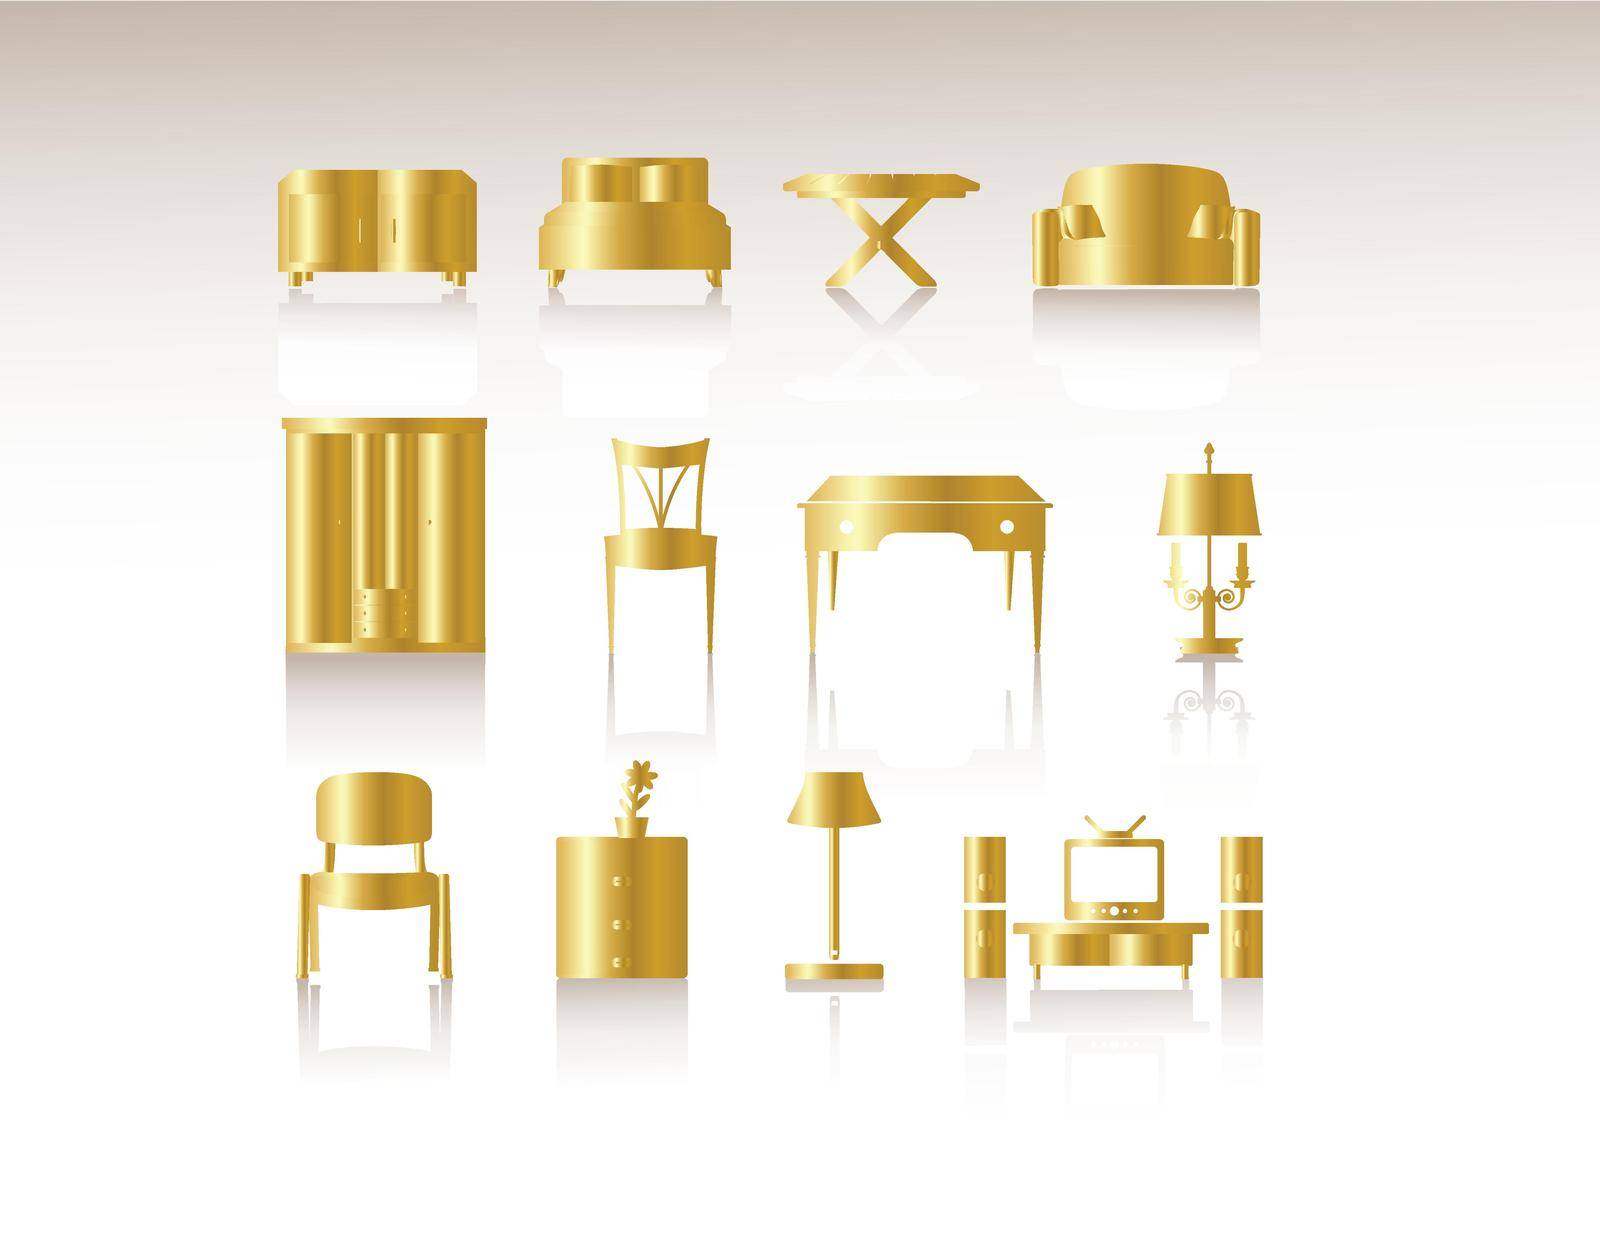 you can use Gold icons furniture isolate on white background to design banners, posters, backgrounds, ...etc.